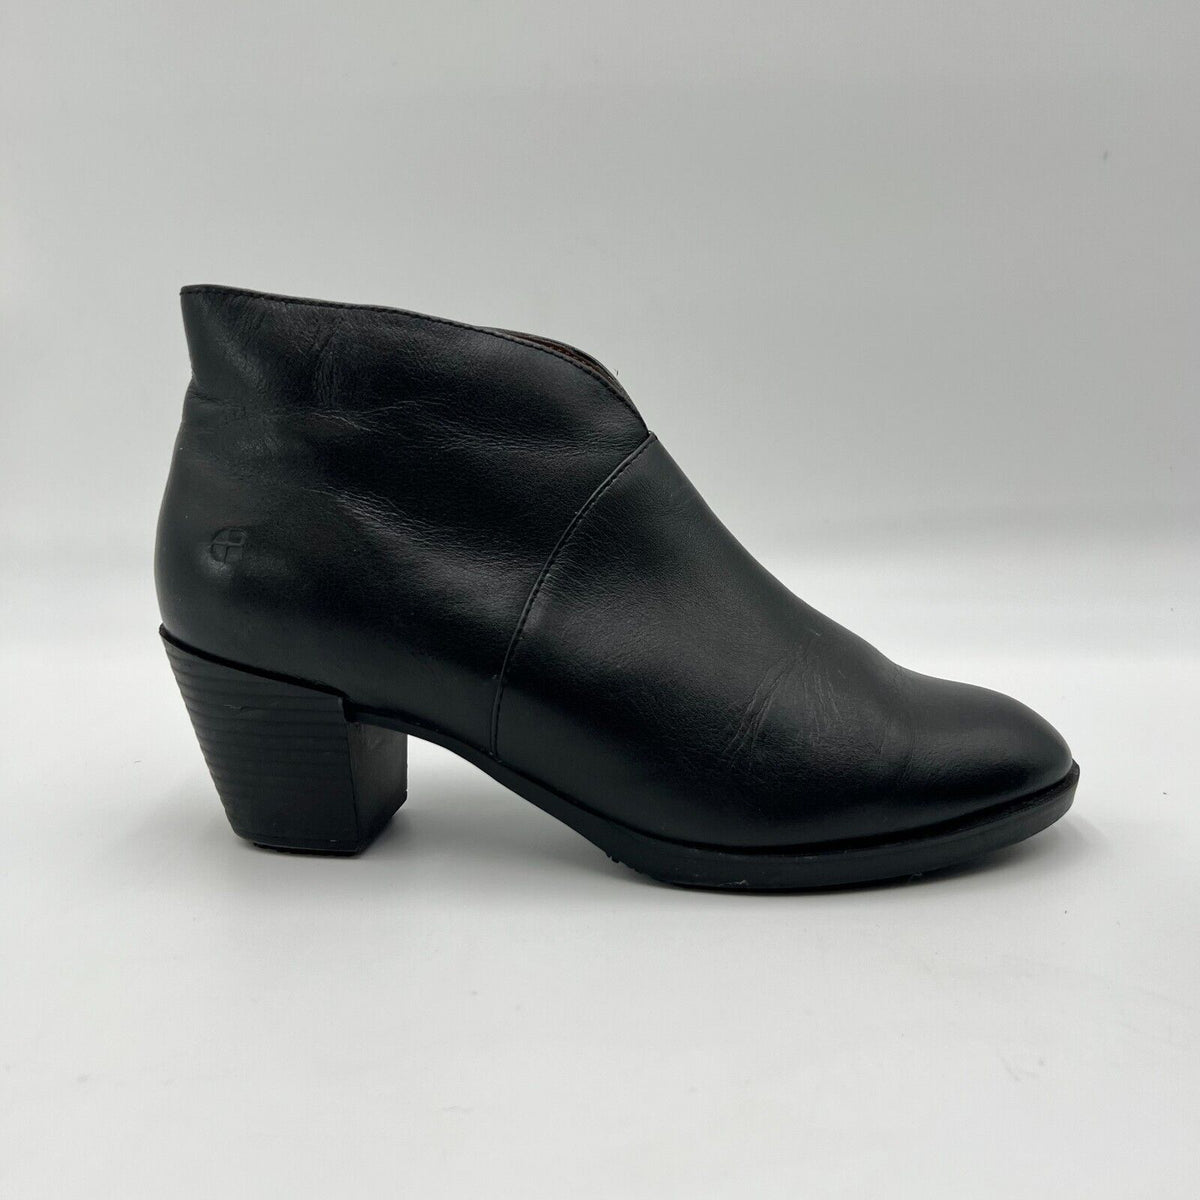 Shoes for Crews Delilah Black Leather Zip Ankle Boots 2" Heel Womens Size 8.5